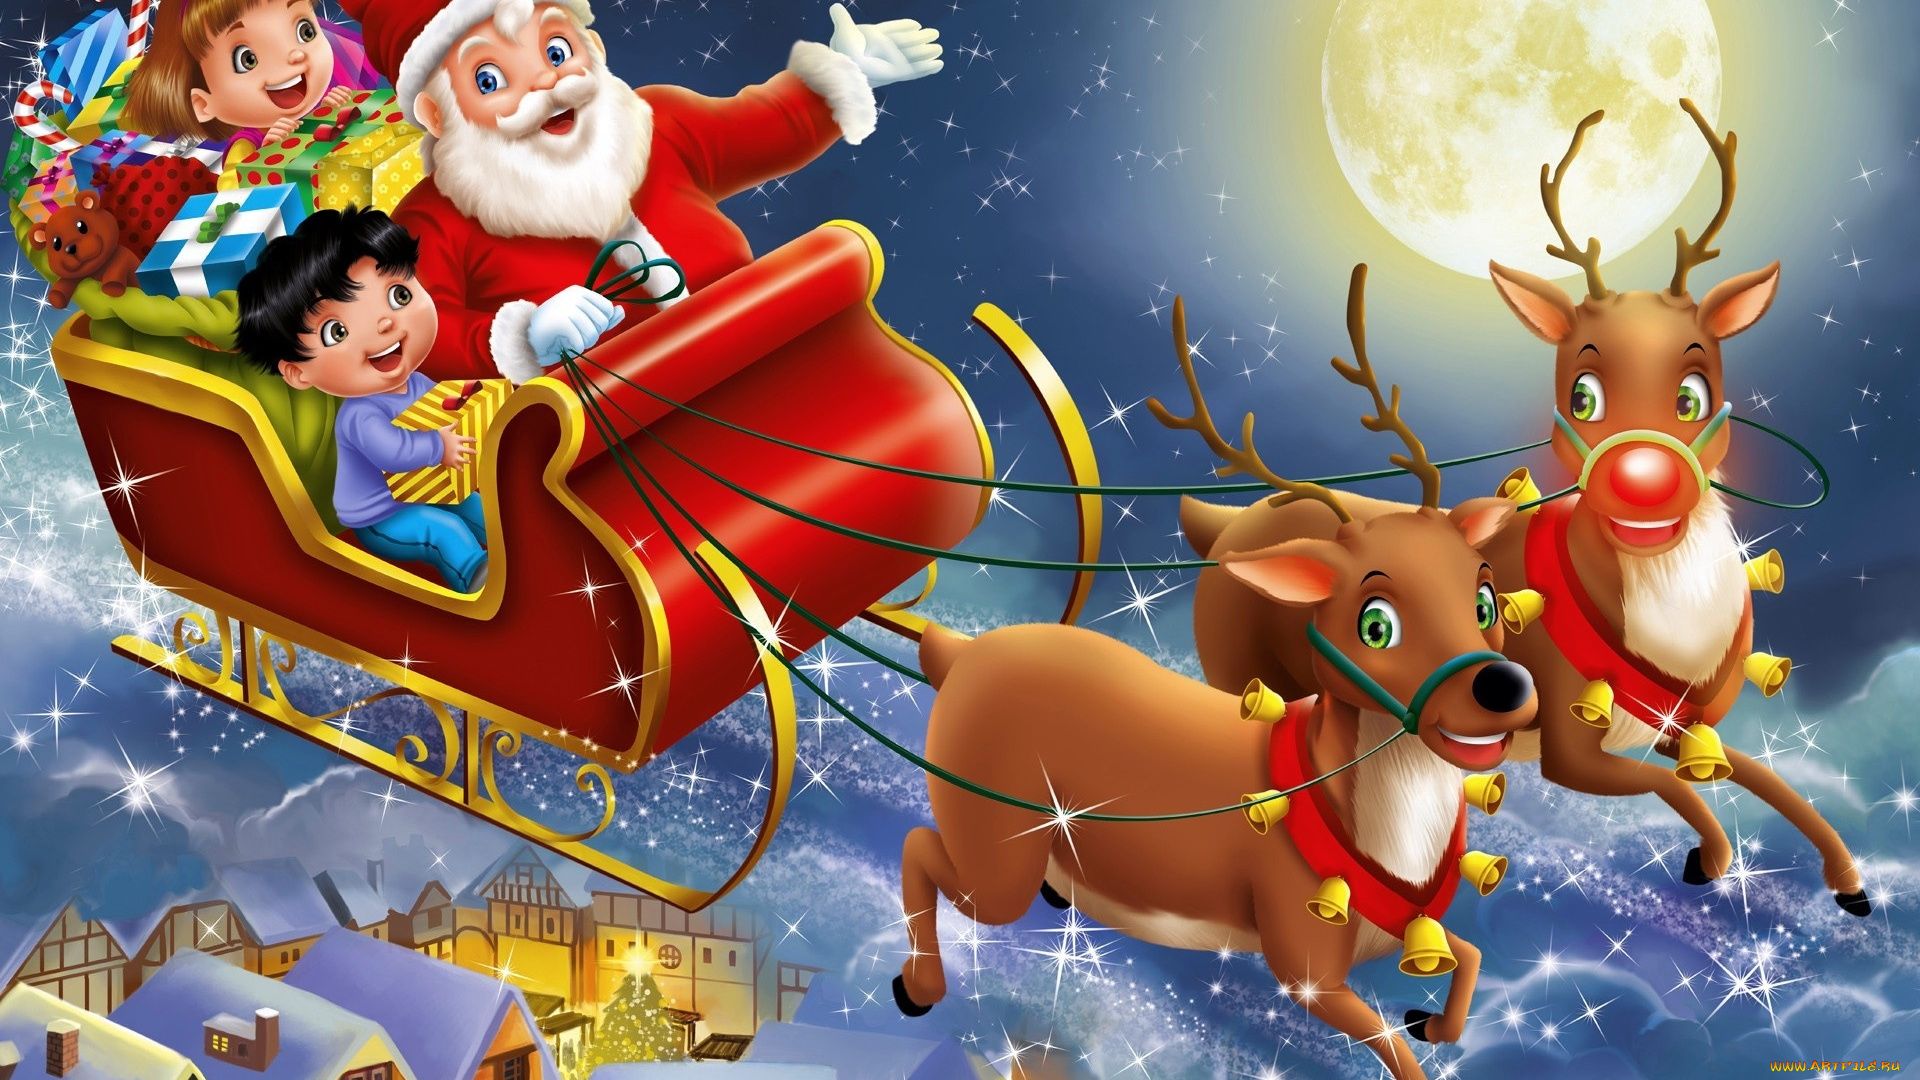 Christmas Sleigh download free wallpaper image search